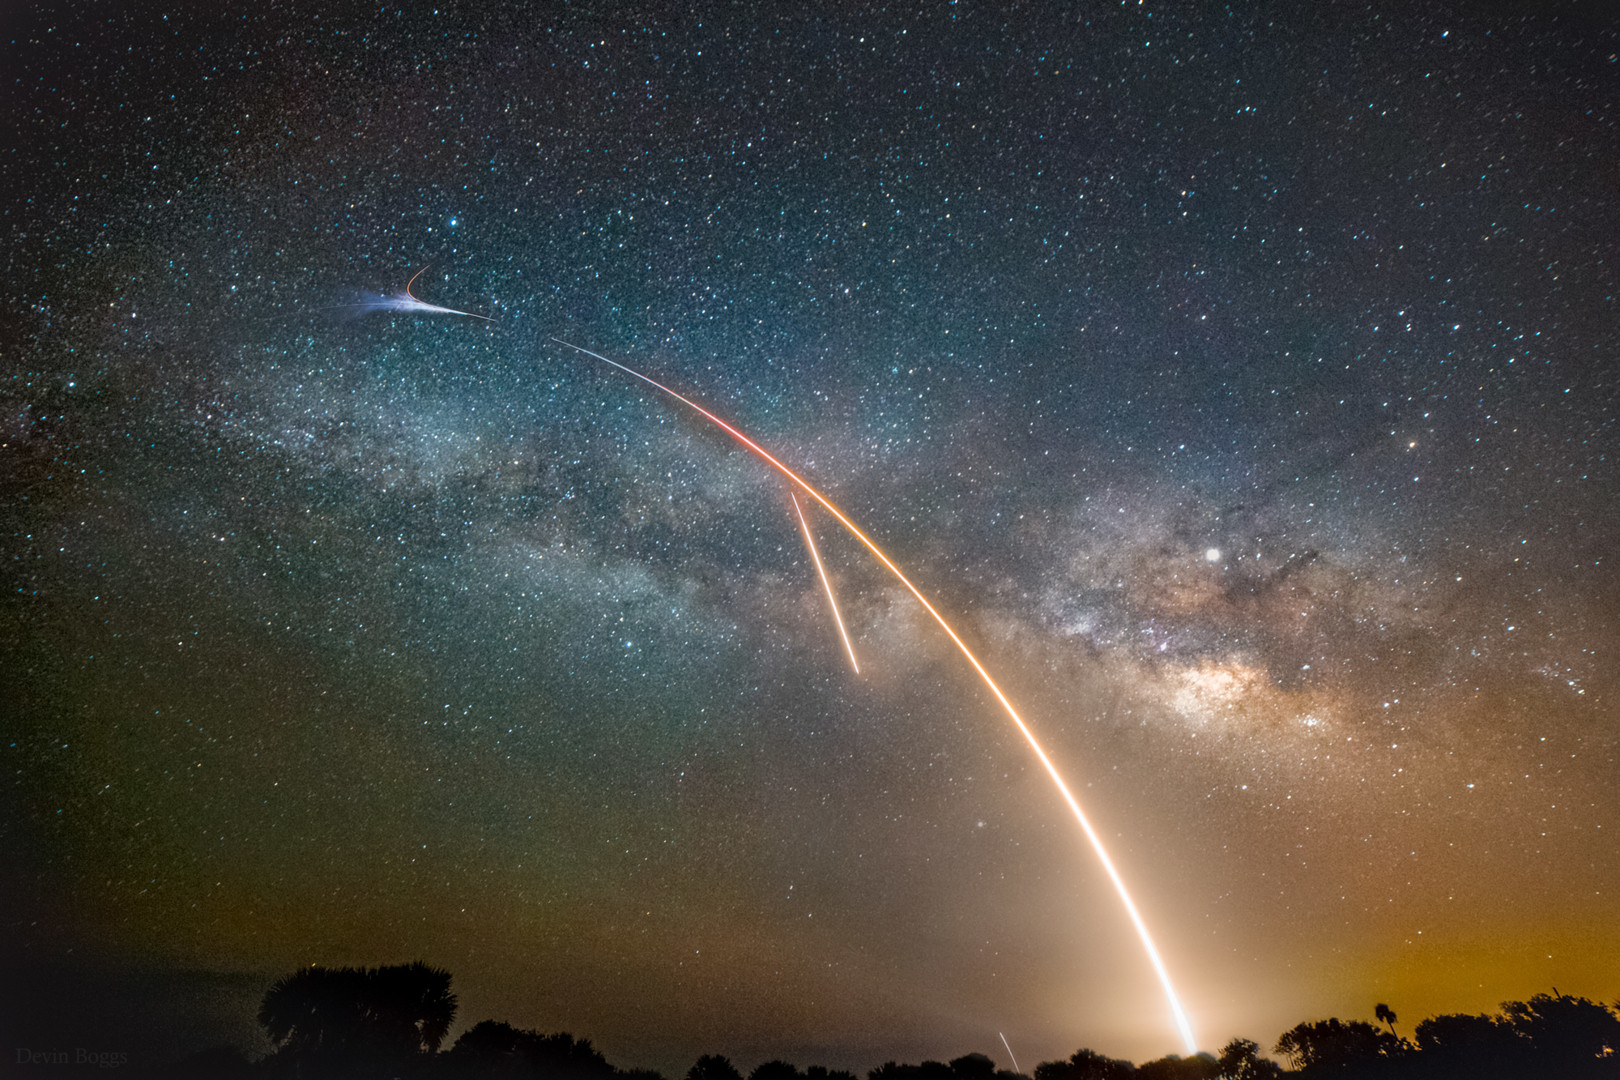 Milky Way, Launch, and Landing